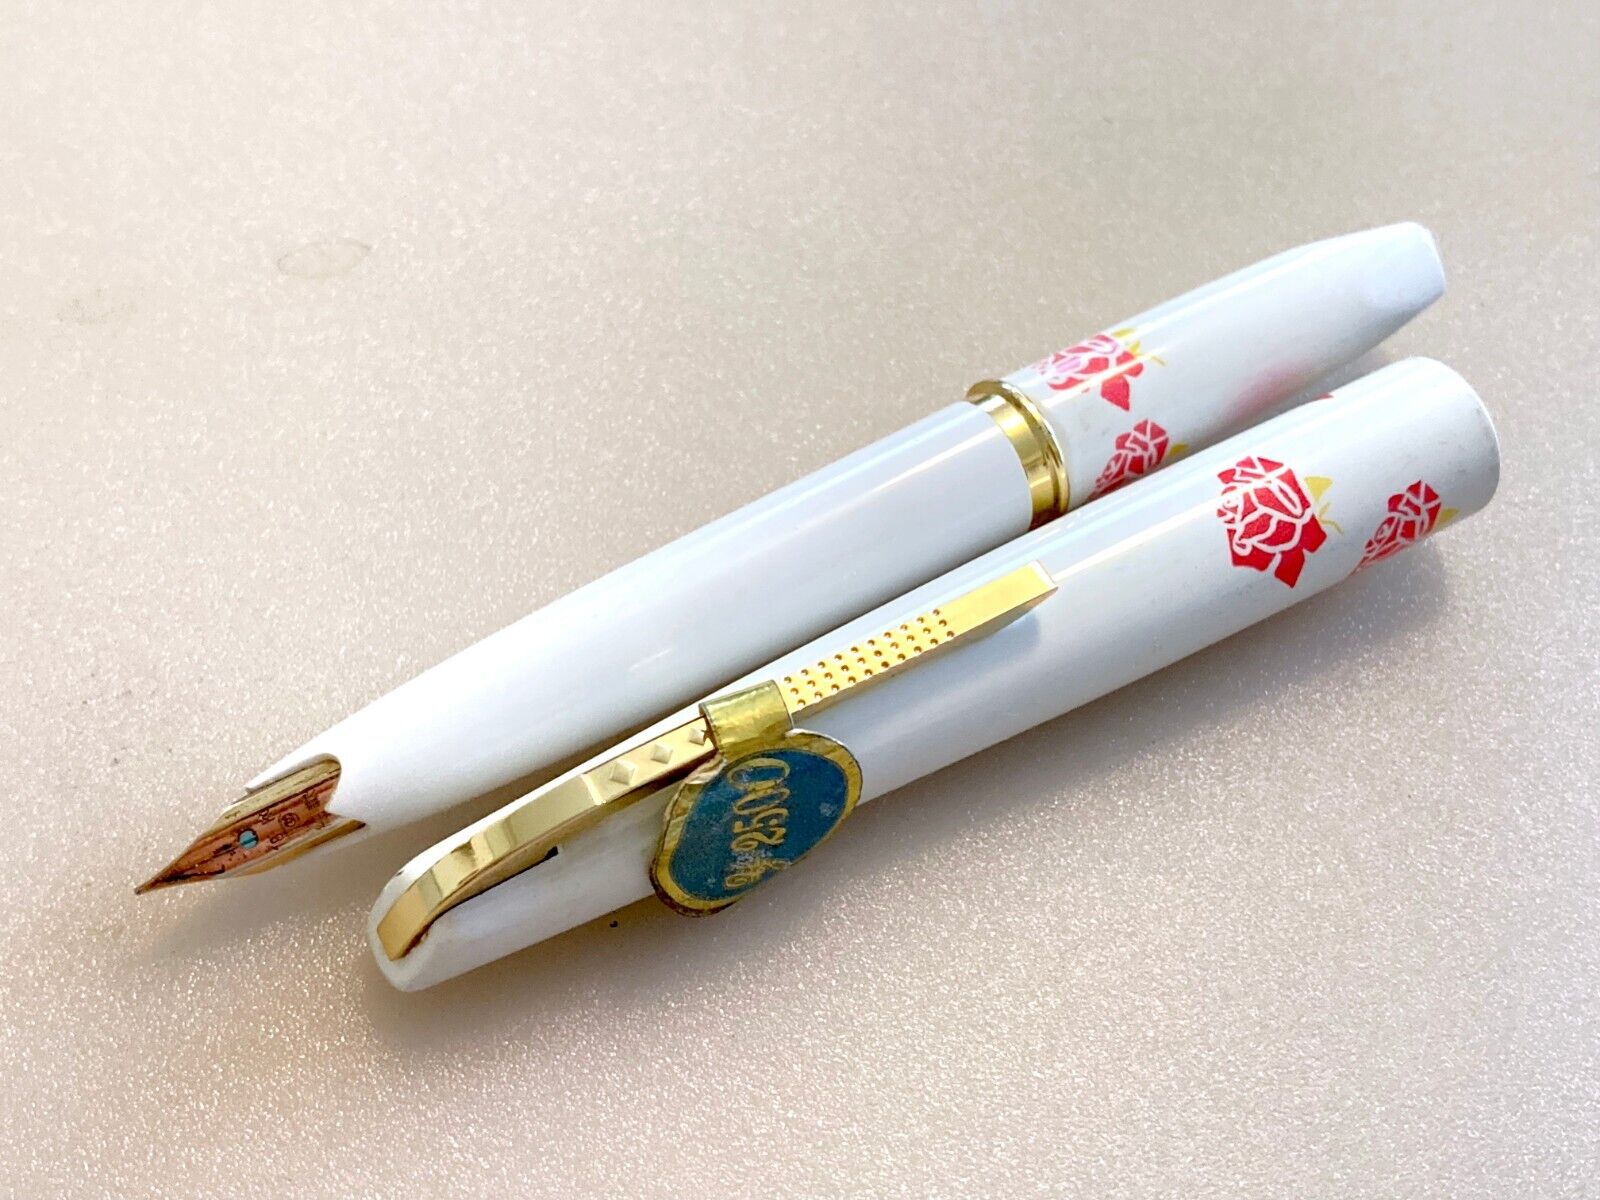 PLATINUM pocket 18K   FS   1970's metal white axis fountain pen  NEW  from JAPAN